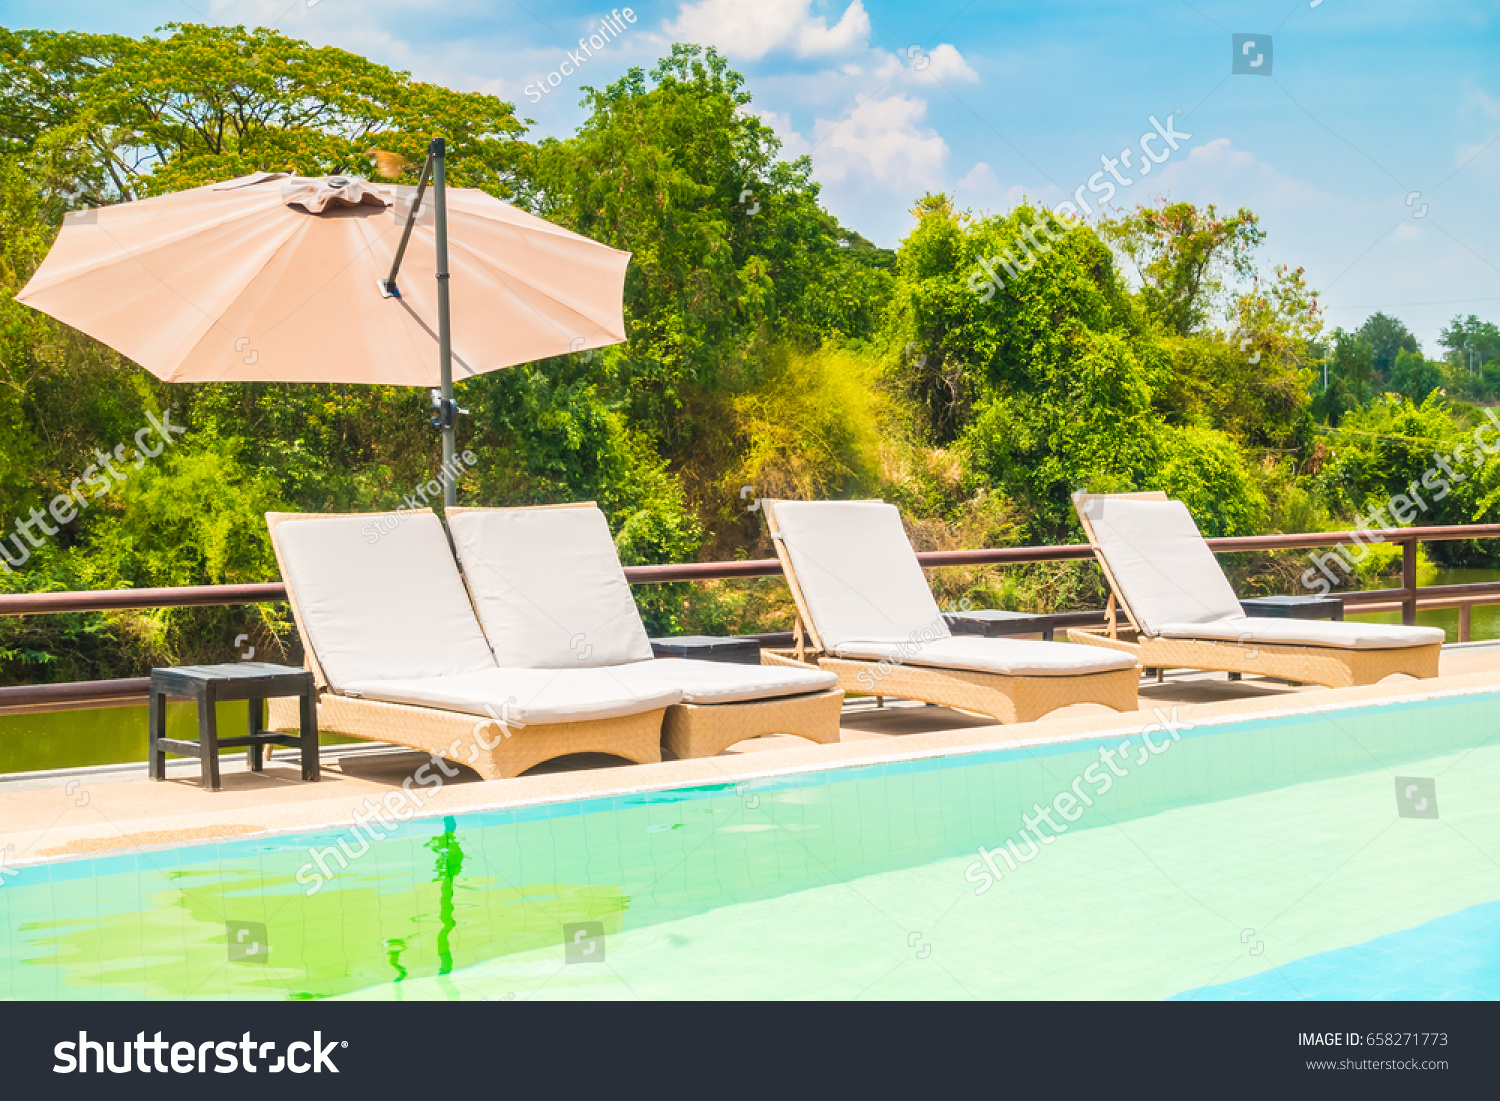 Umbrella and chair with swimming pool and outdoor view around hotel and resort #658271773